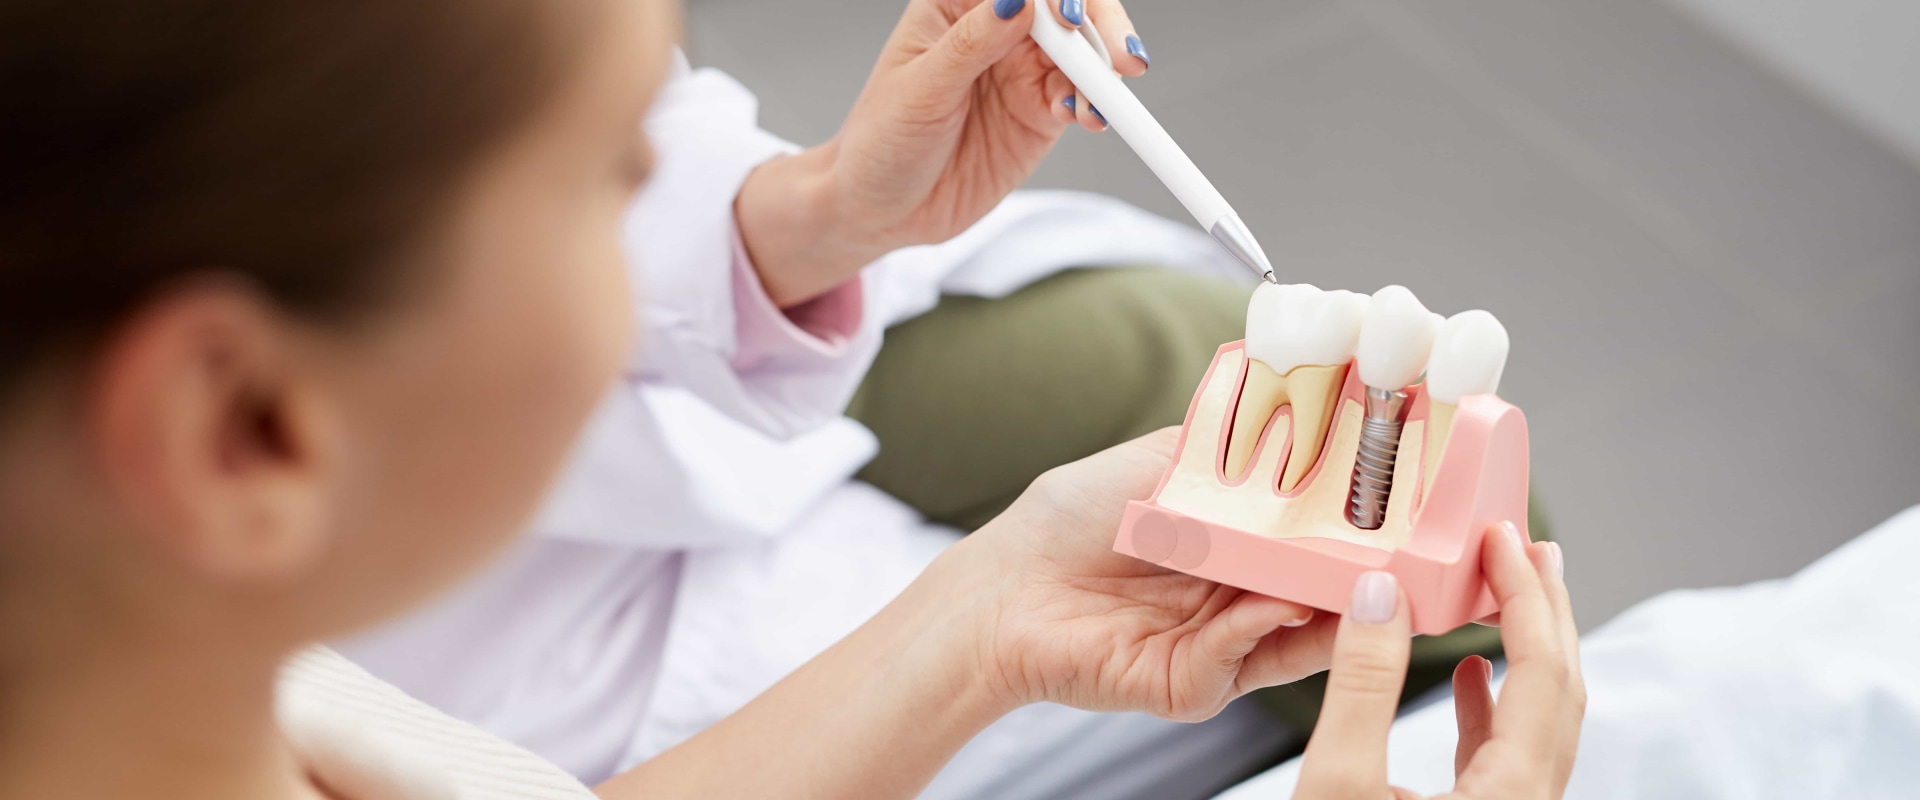 When are dental implants medically necessary?